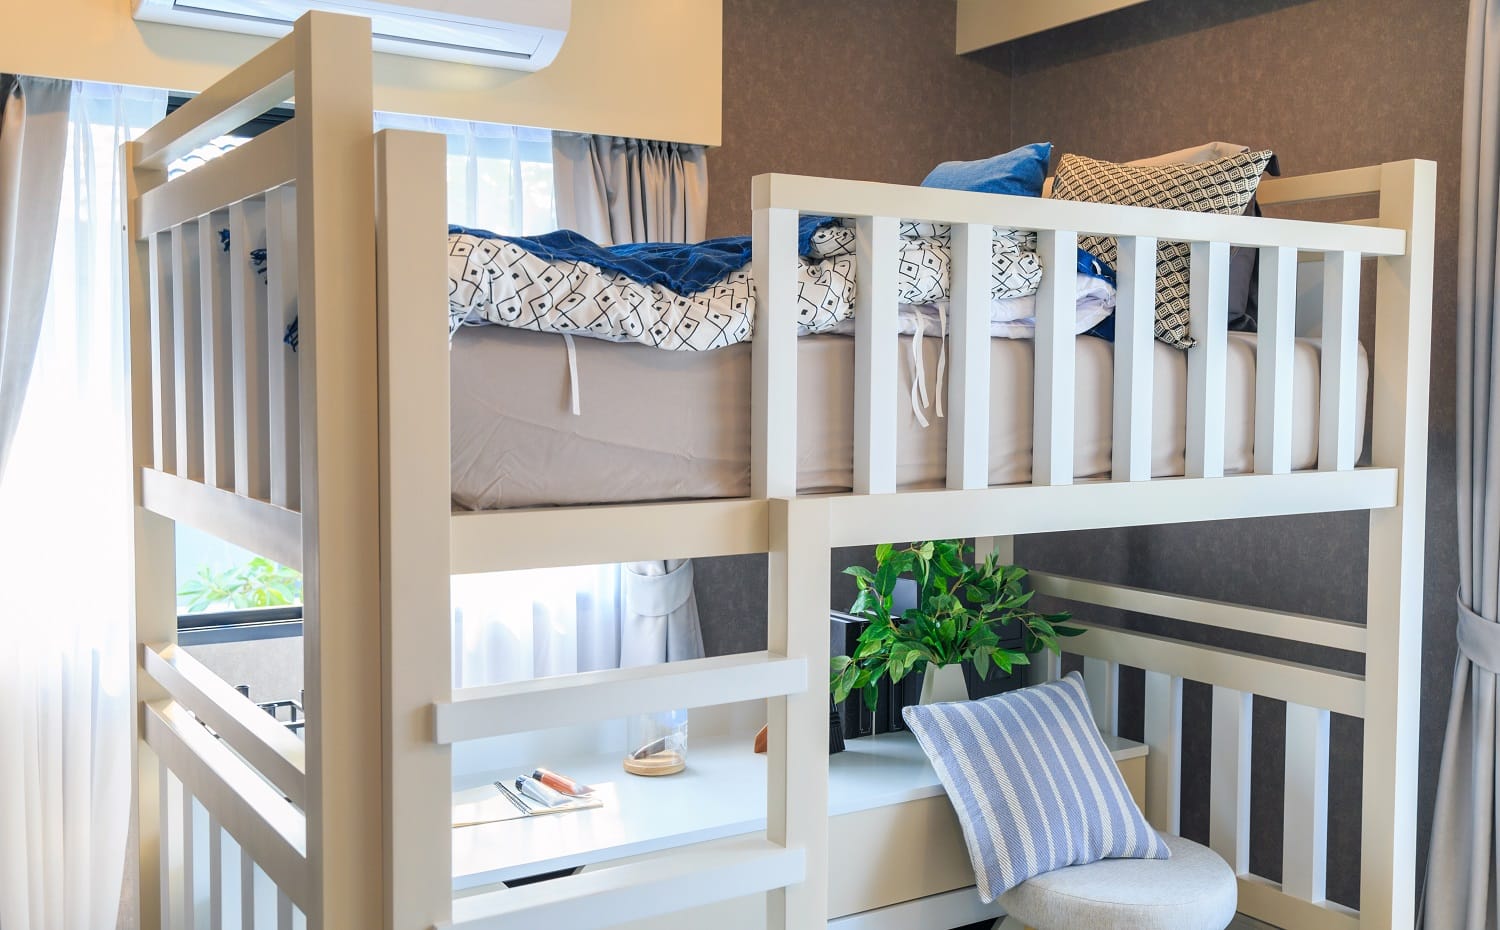 A white wooden bunk bed with a pillow and air conditioner in a children's bedroom with warm light from a window.